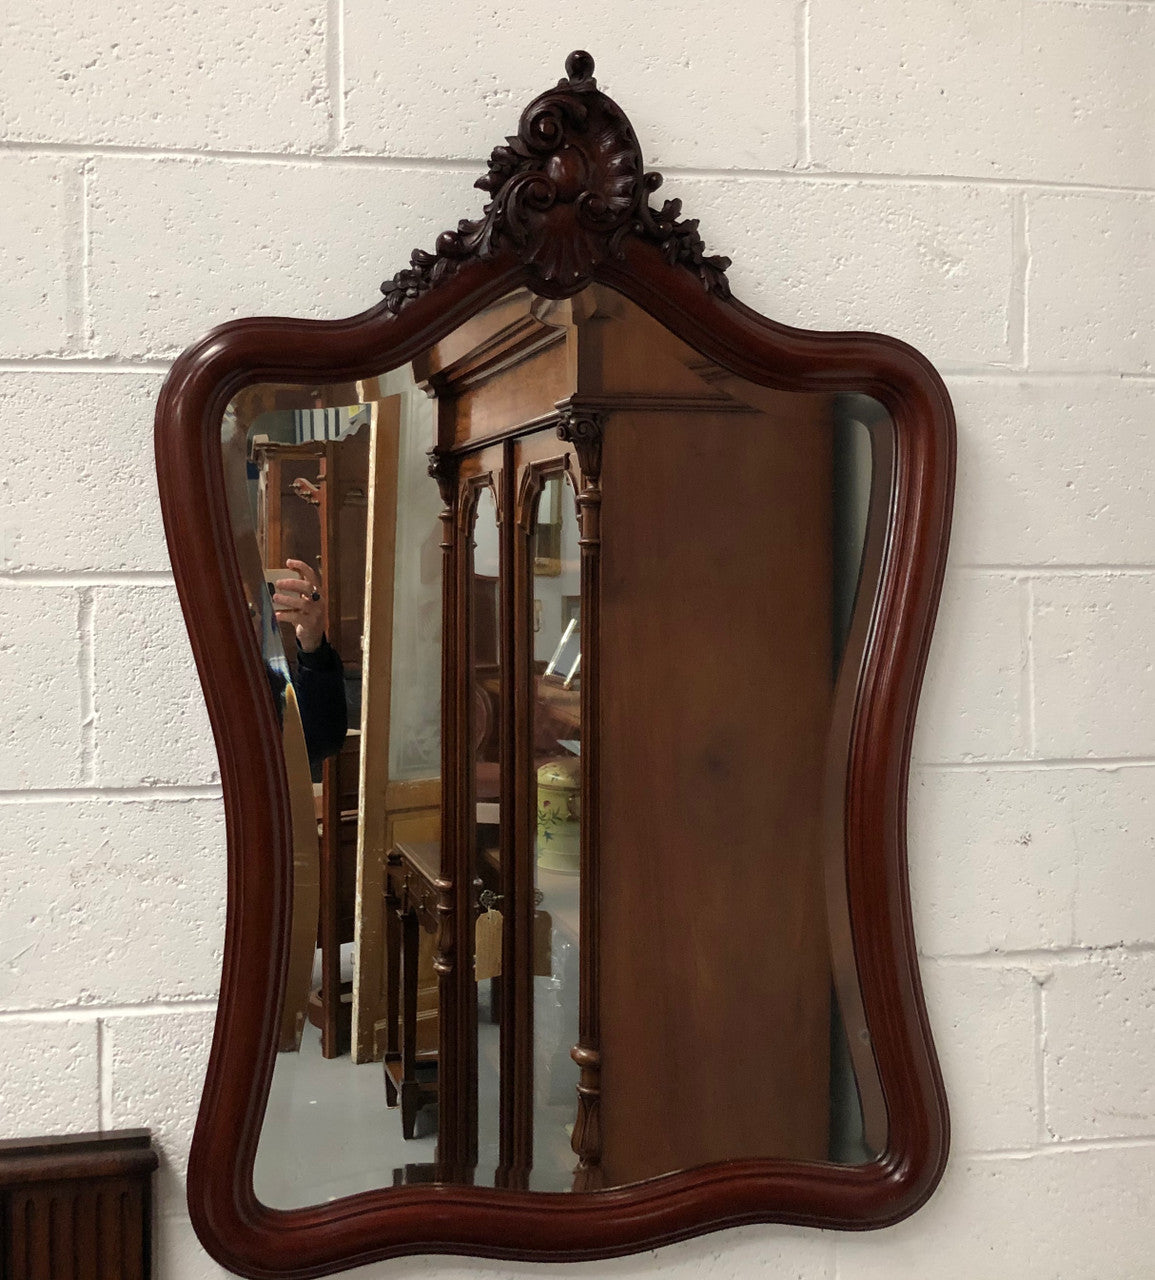 Lovely French mahogany wall mirror with carved detail, beveled glass and in good condition.